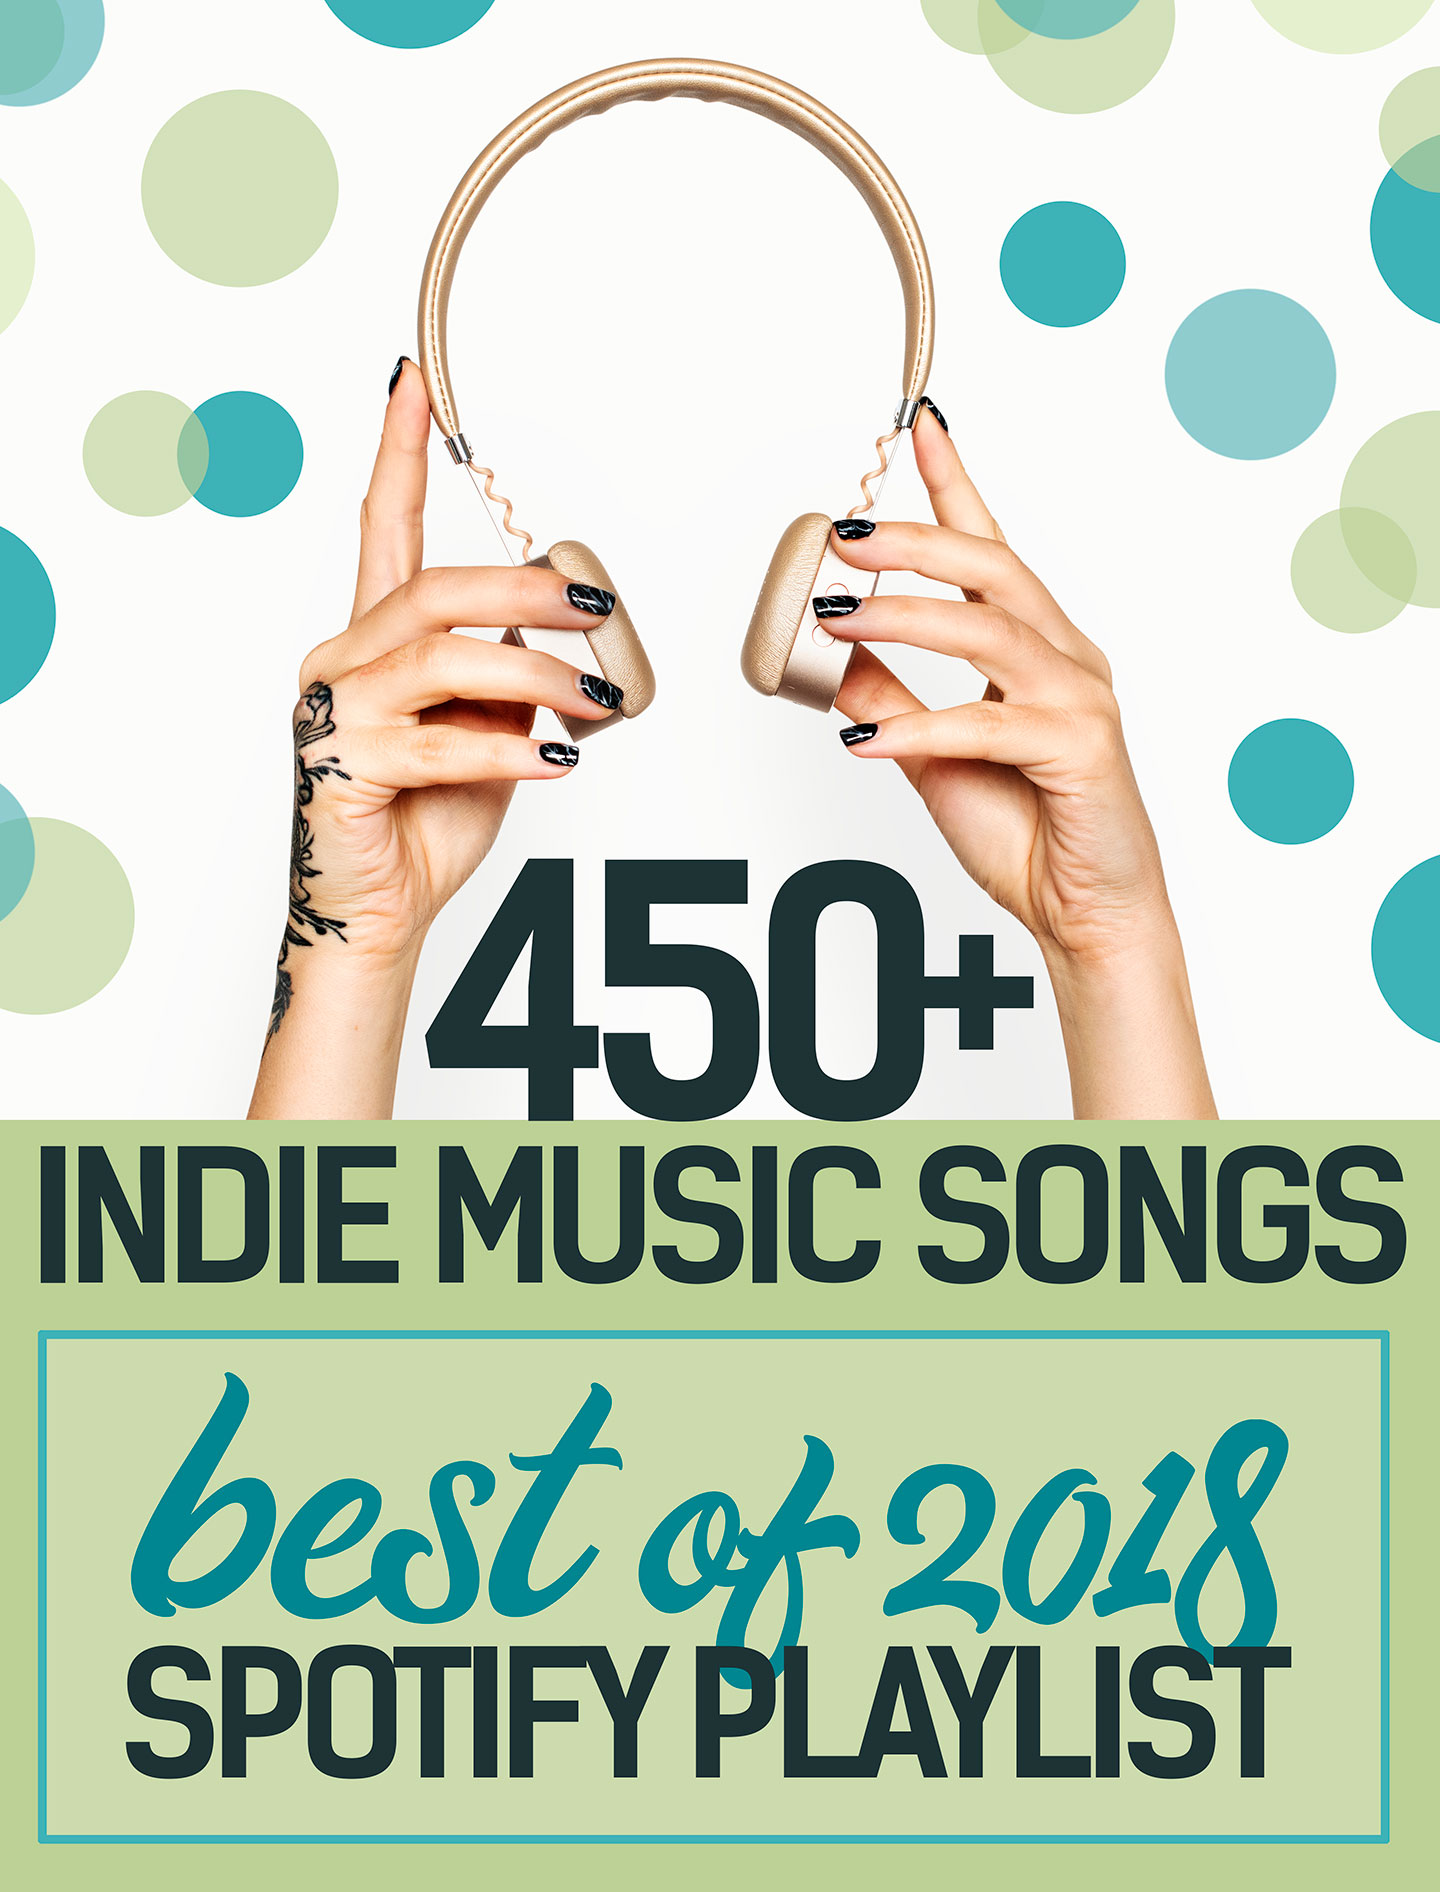 2018 Indie Music Playlist - 450+ Best Songs of 2018 #Spotify #Playlist #Music